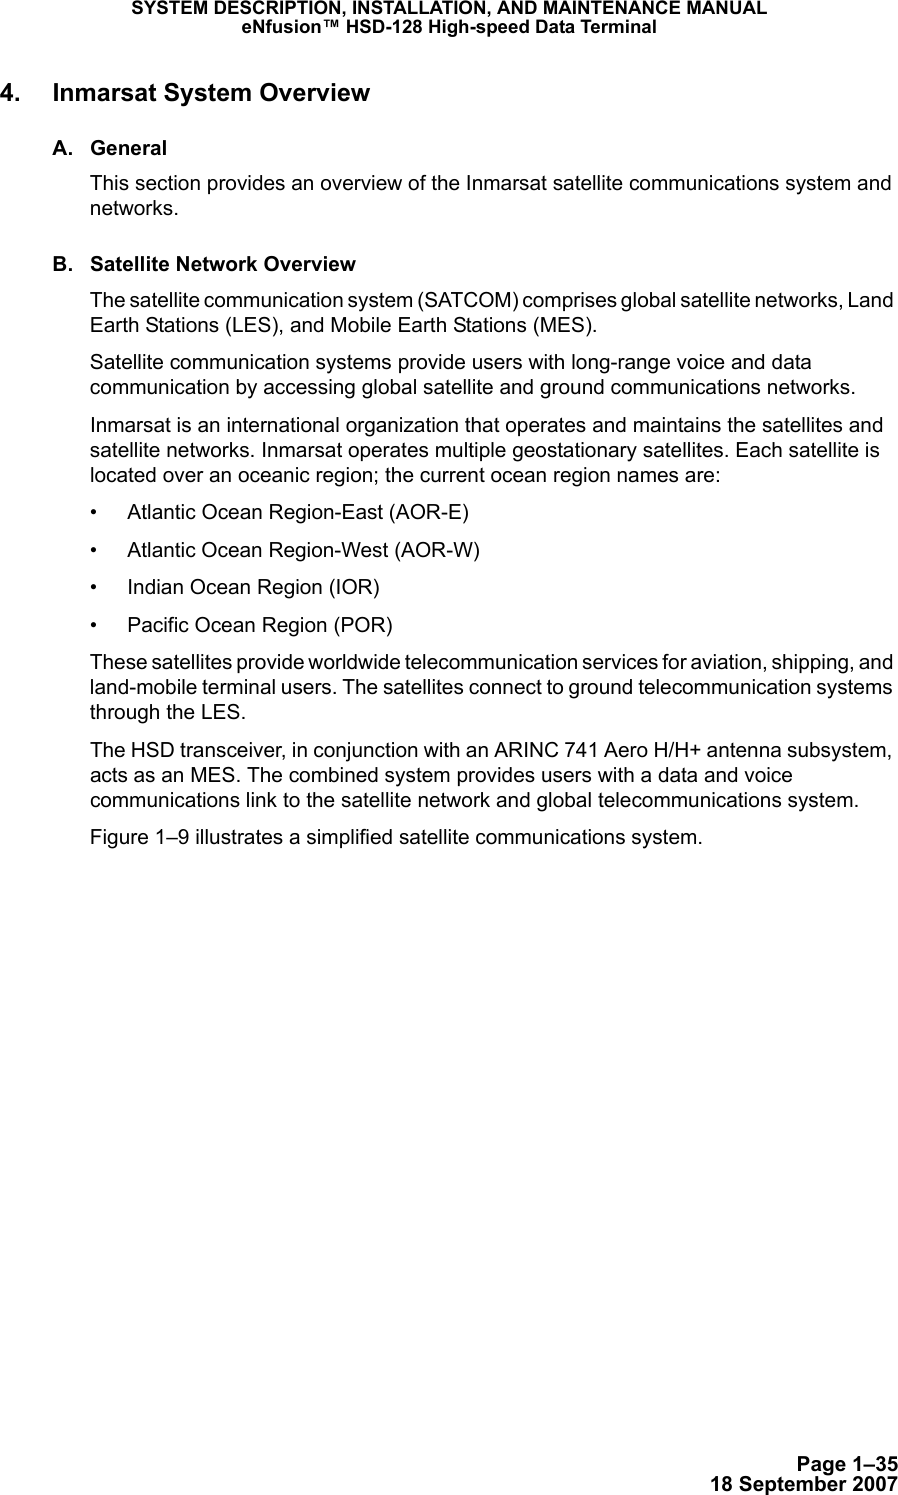 Page 1–3518 September 2007SYSTEM DESCRIPTION, INSTALLATION, AND MAINTENANCE MANUALeNfusion™ HSD-128 High-speed Data Terminal4. Inmarsat System OverviewA. GeneralThis section provides an overview of the Inmarsat satellite communications system and networks.B. Satellite Network OverviewThe satellite communication system (SATCOM) comprises global satellite networks, Land Earth Stations (LES), and Mobile Earth Stations (MES).Satellite communication systems provide users with long-range voice and data communication by accessing global satellite and ground communications networks.Inmarsat is an international organization that operates and maintains the satellites and satellite networks. Inmarsat operates multiple geostationary satellites. Each satellite is located over an oceanic region; the current ocean region names are:• Atlantic Ocean Region-East (AOR-E)• Atlantic Ocean Region-West (AOR-W)• Indian Ocean Region (IOR)• Pacific Ocean Region (POR)These satellites provide worldwide telecommunication services for aviation, shipping, and land-mobile terminal users. The satellites connect to ground telecommunication systems through the LES.The HSD transceiver, in conjunction with an ARINC 741 Aero H/H+ antenna subsystem, acts as an MES. The combined system provides users with a data and voice communications link to the satellite network and global telecommunications system. Figure 1–9 illustrates a simplified satellite communications system.